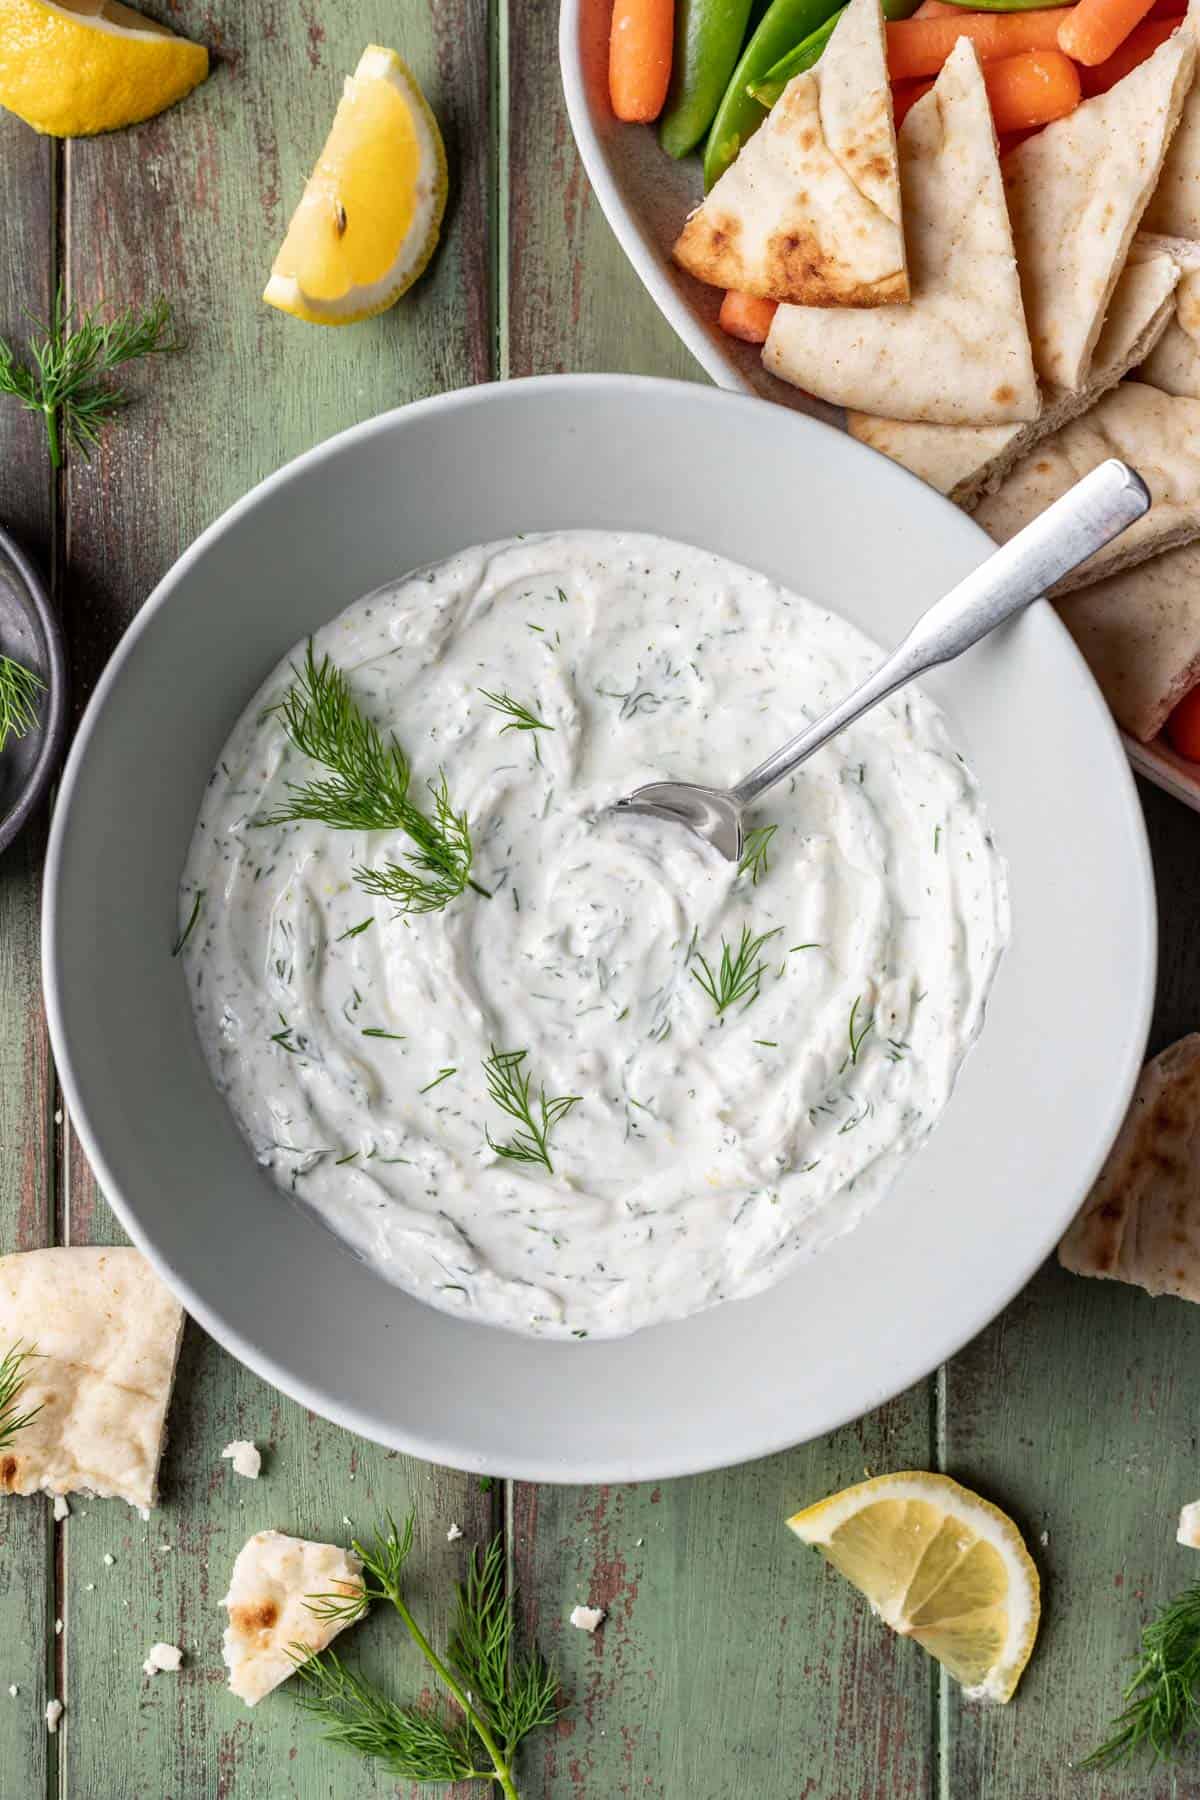 Lemon dill yogurt sauce in a serving bowl with pita and vegetables next to it.